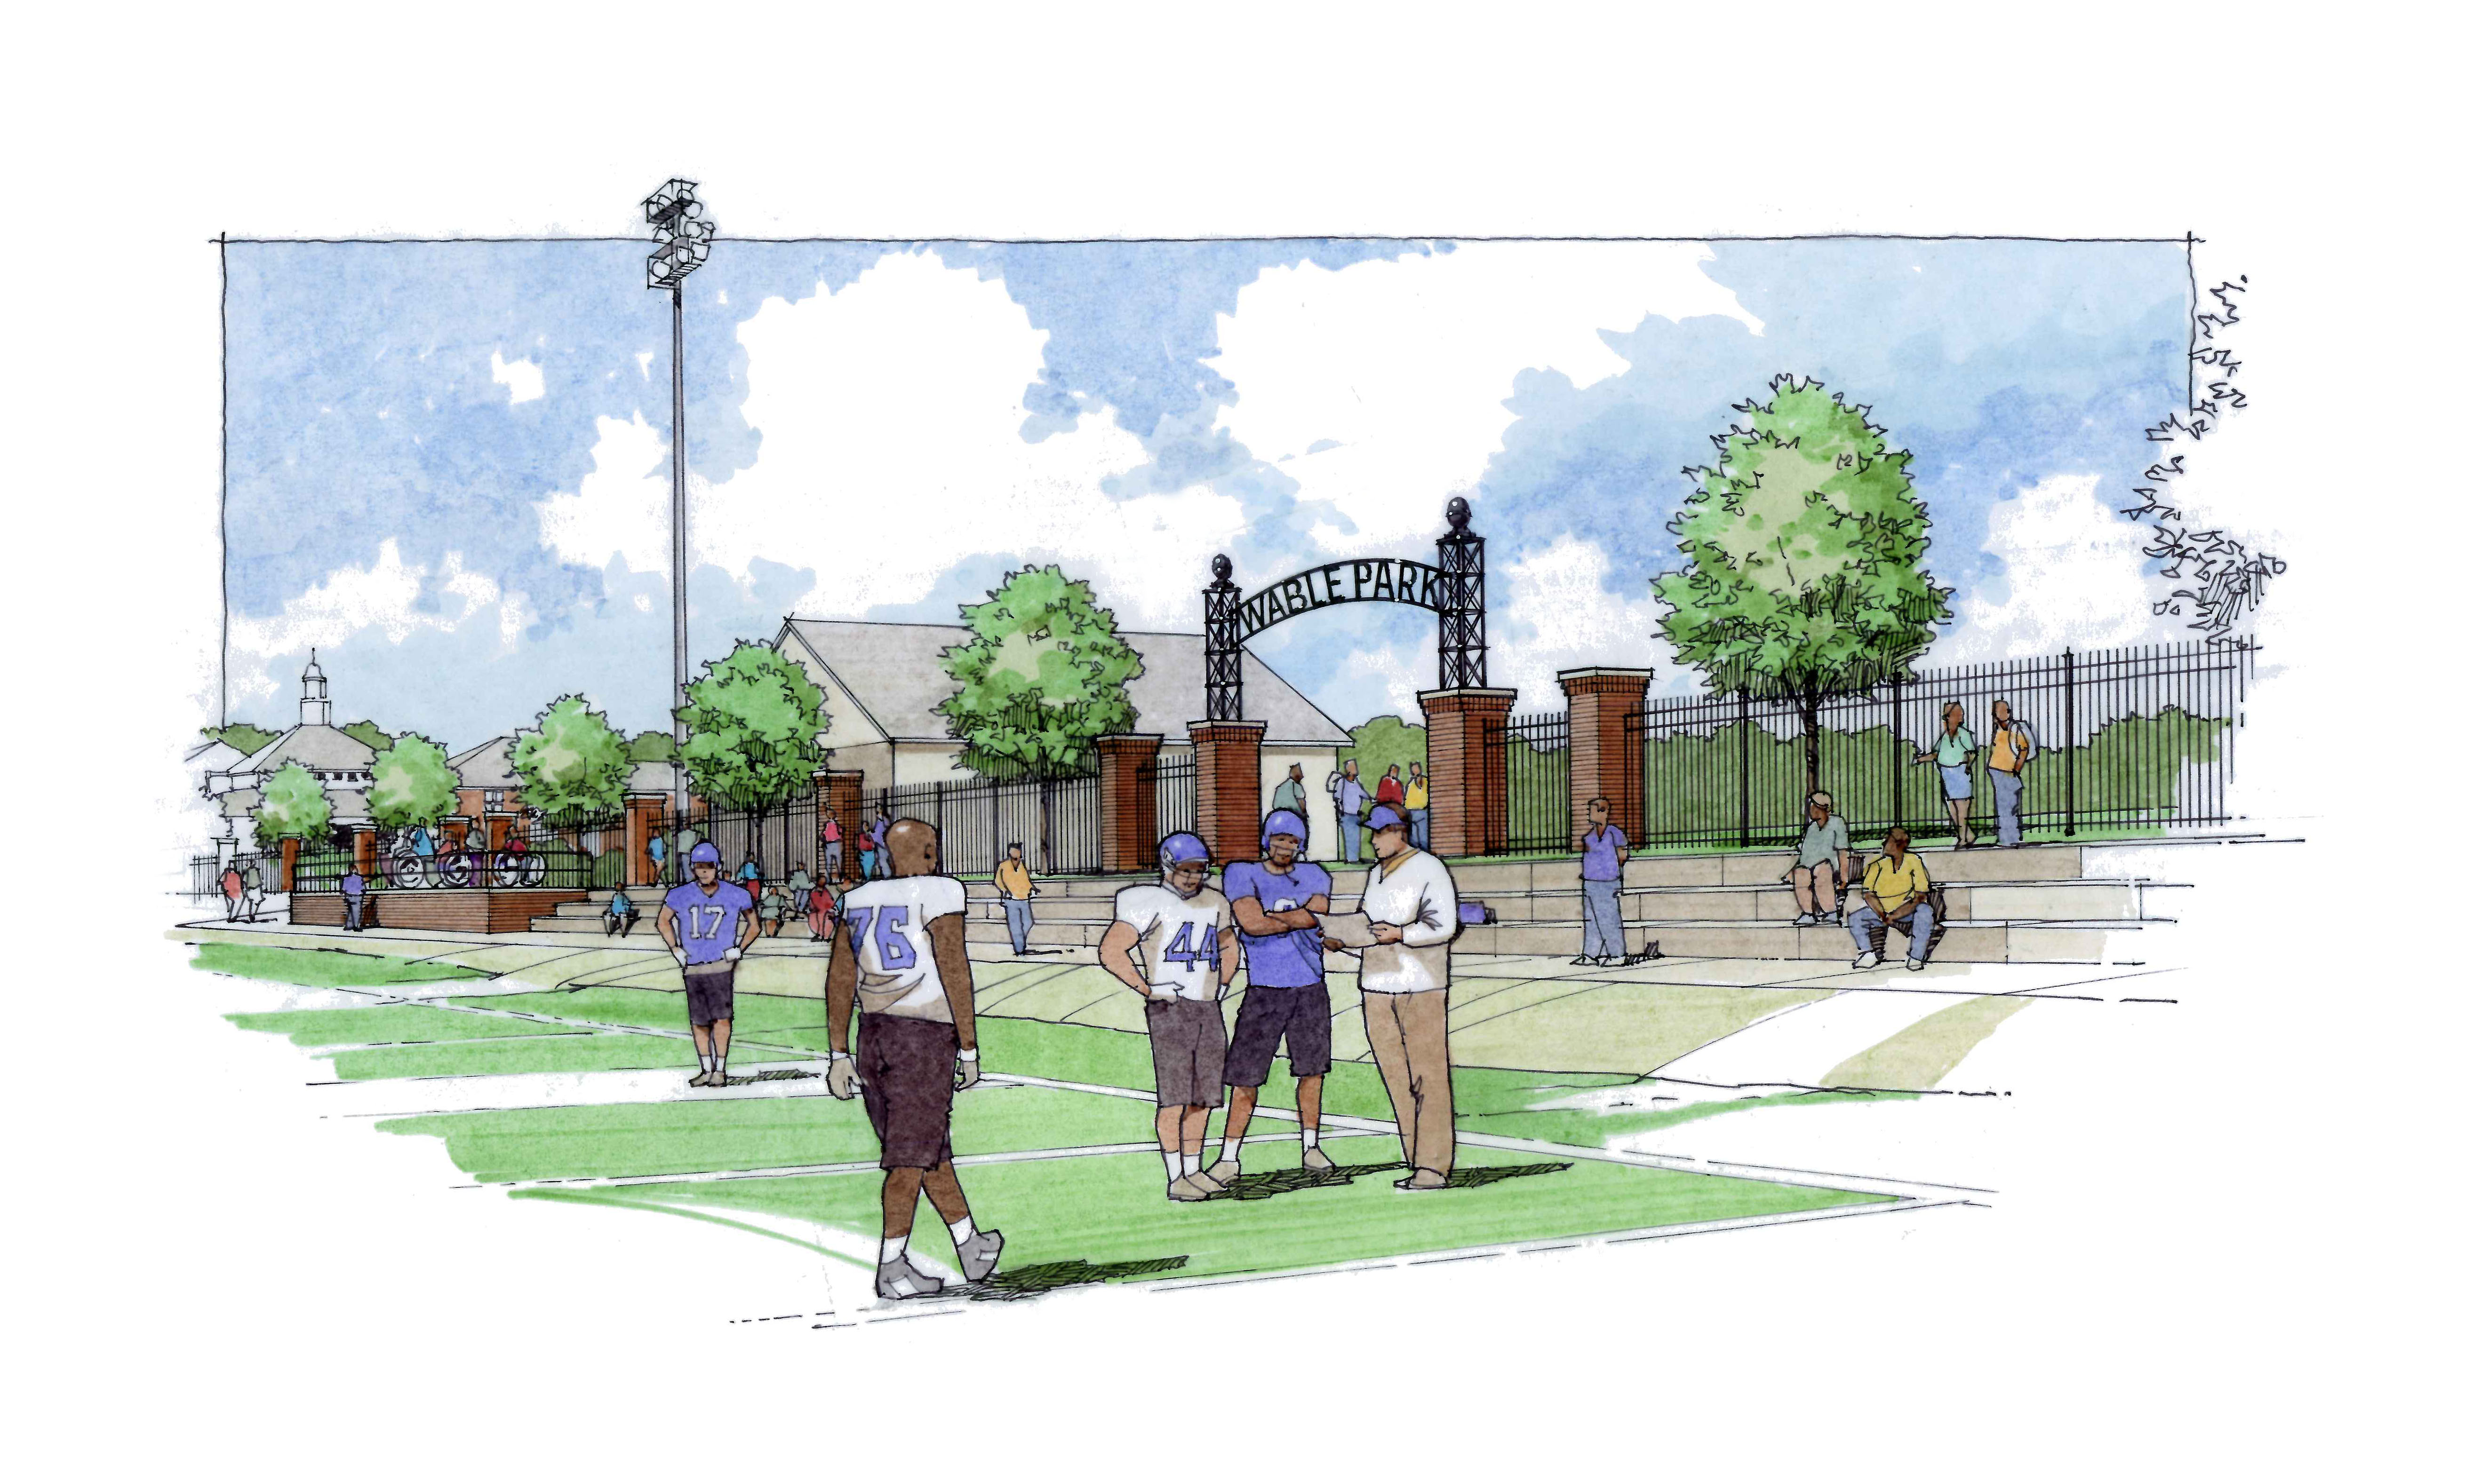 Artist rendering of Wable Park being used for football practice